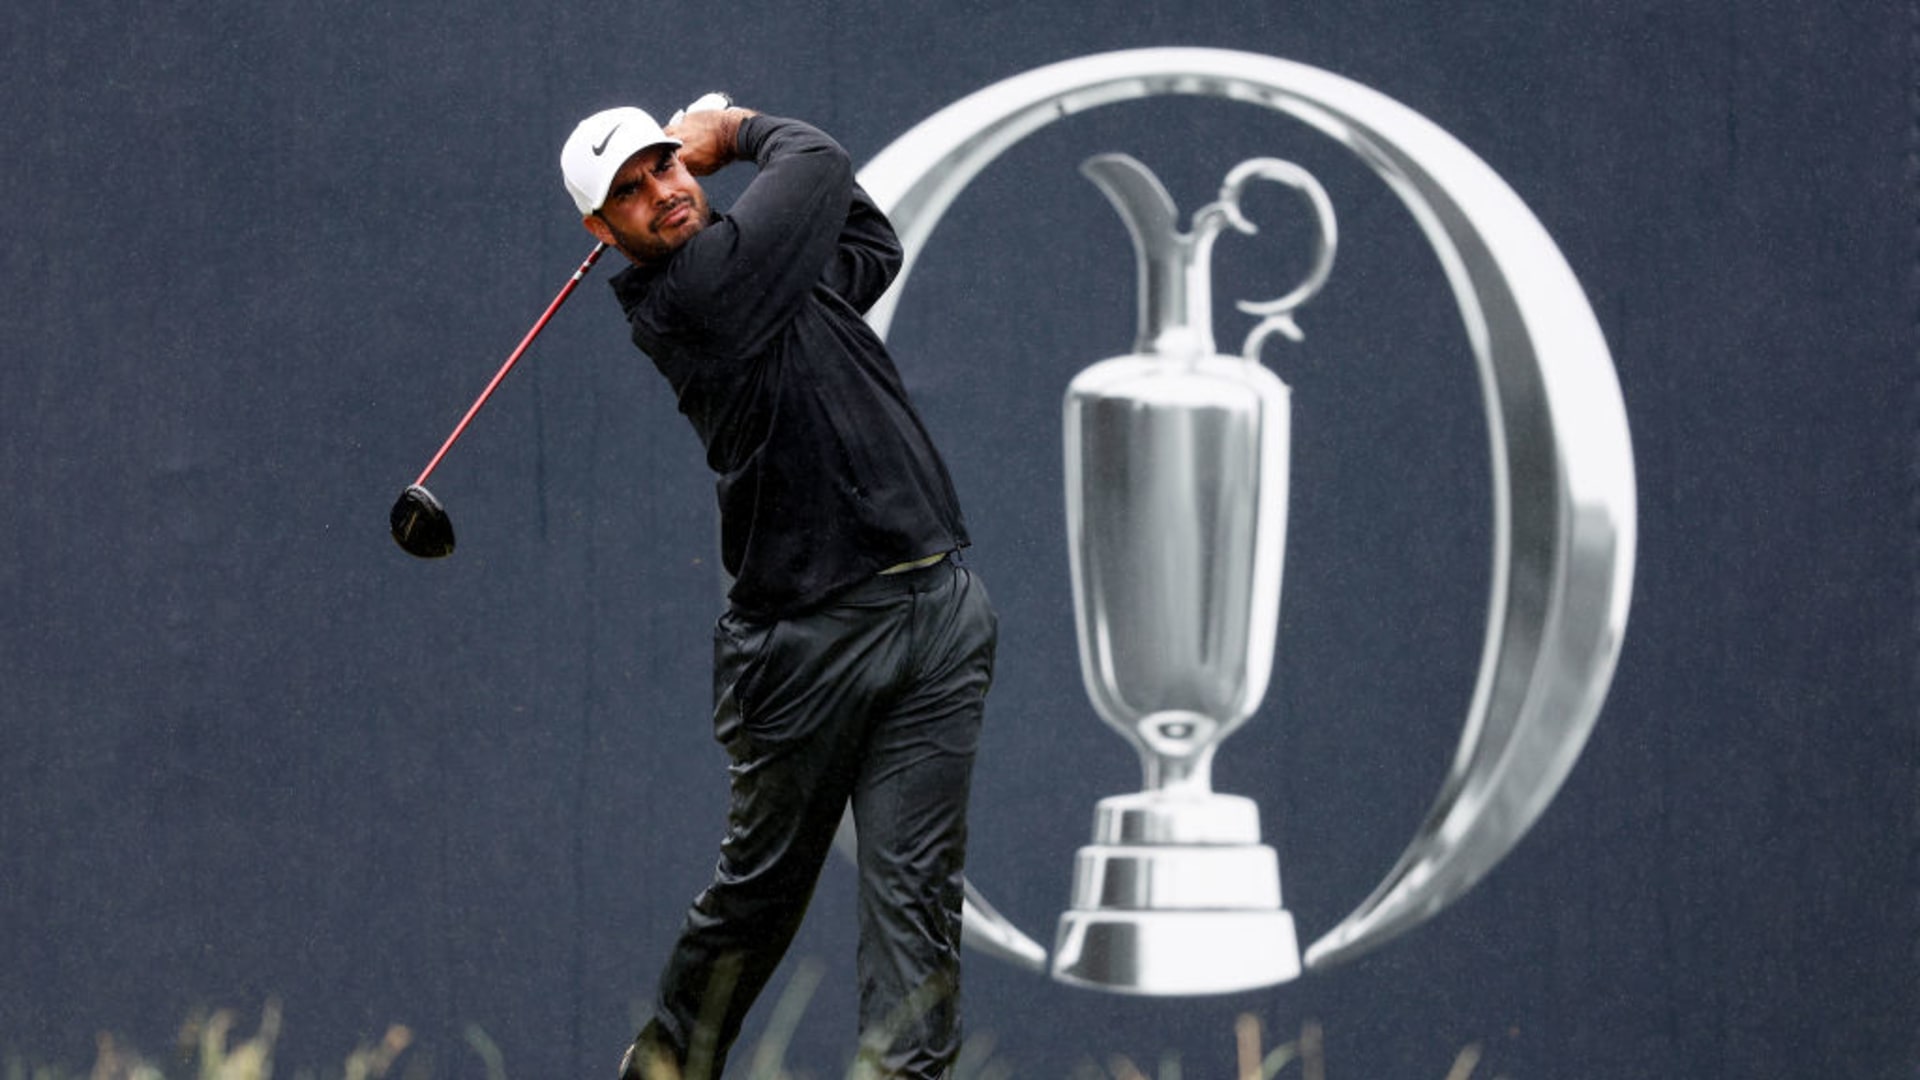 The Top 10 Greatest Golfers to Never Win The Open Championship